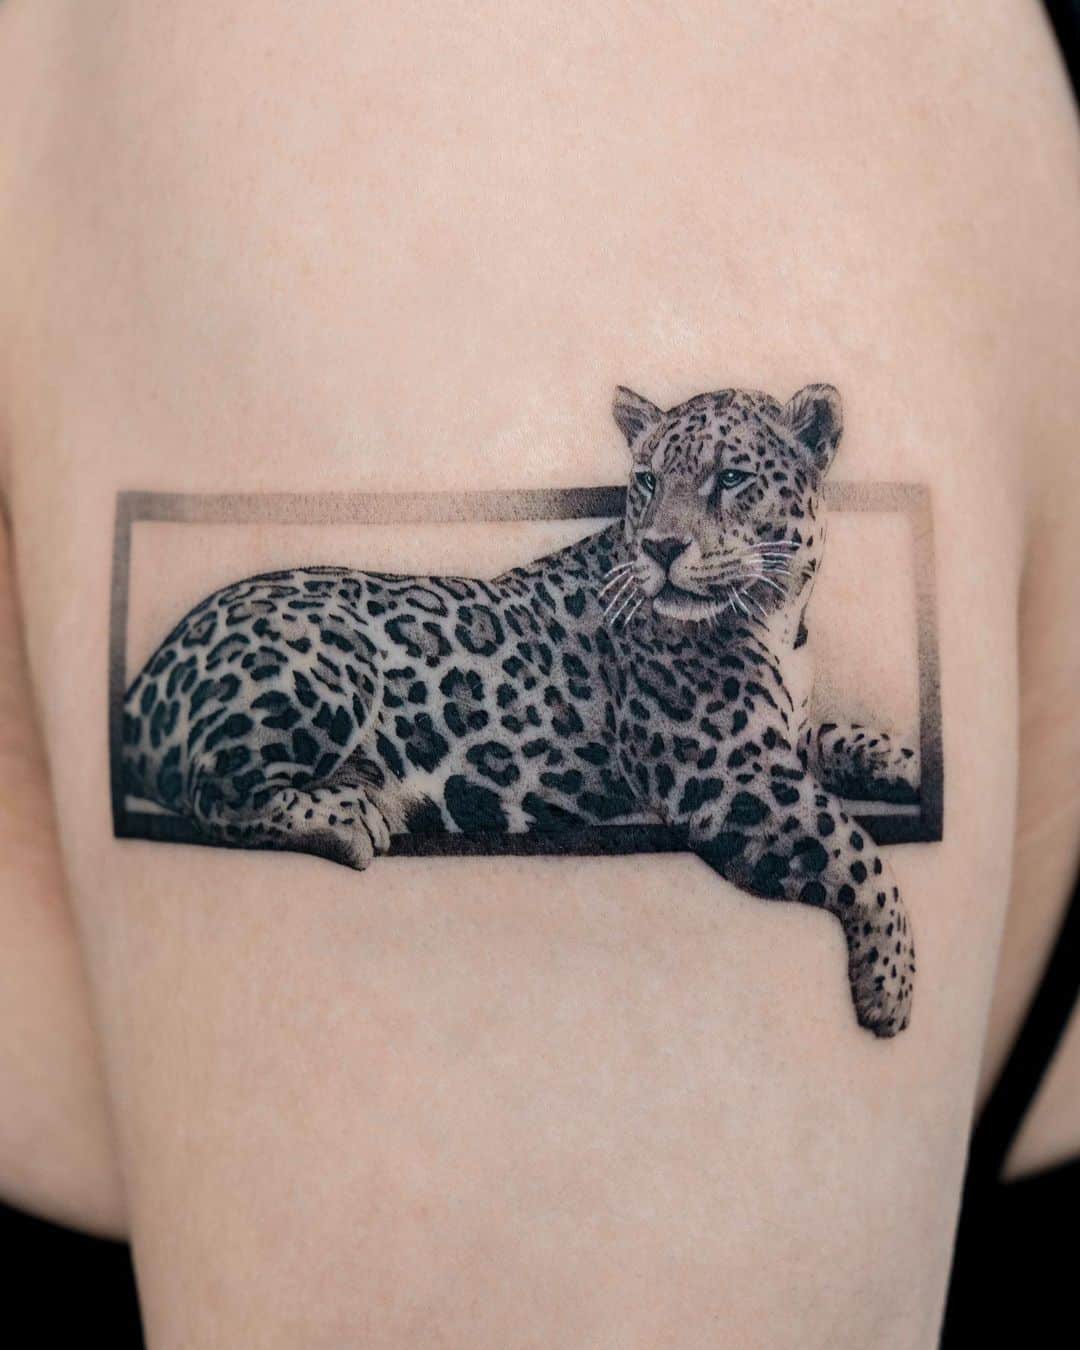 Amazing leopard tattoo by start.your .line